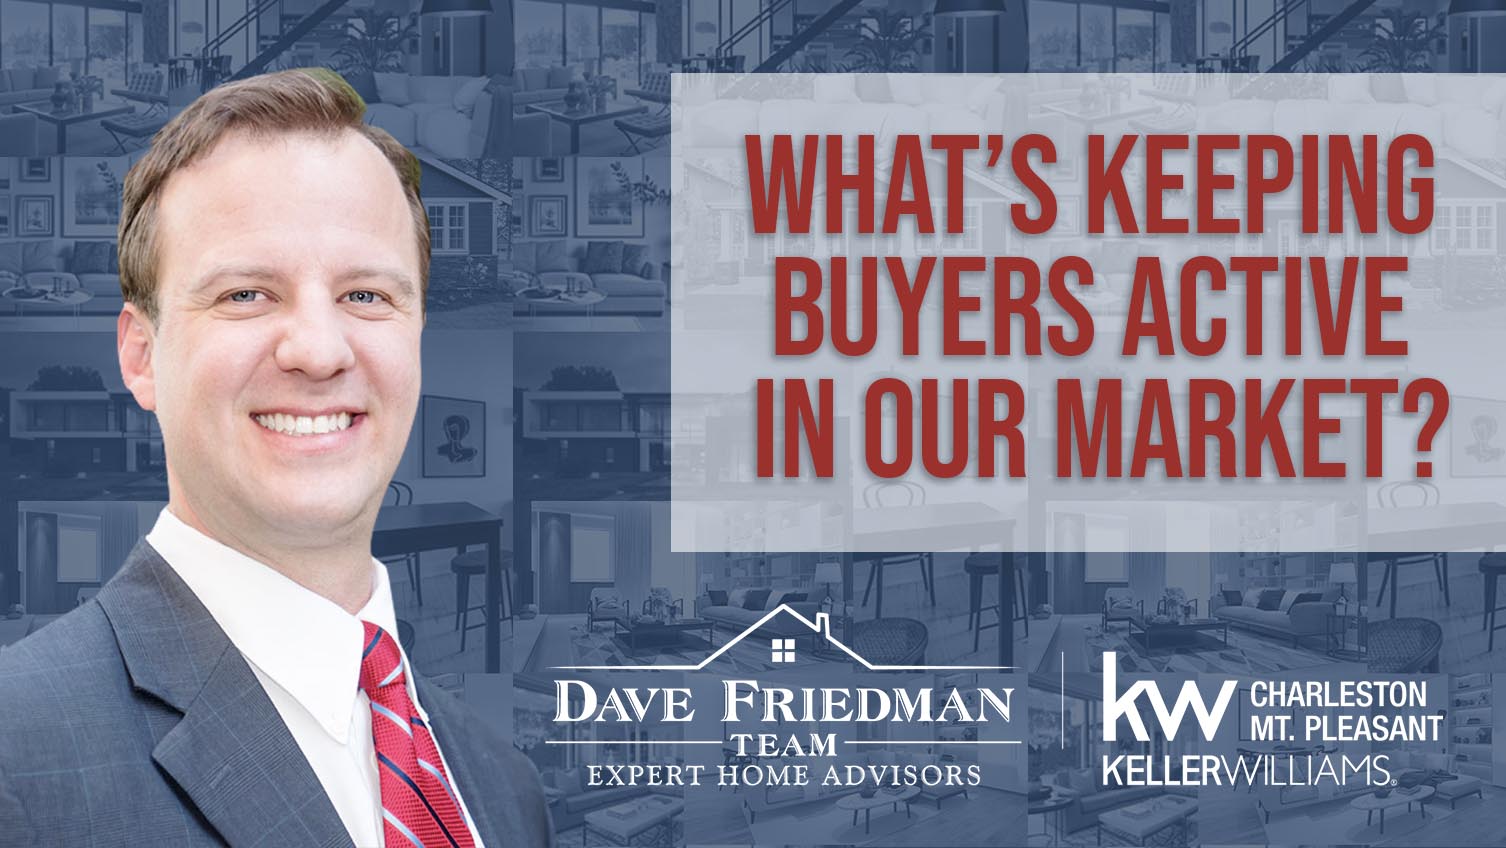 Q: What’s Keeping Buyers Active in Our Market?